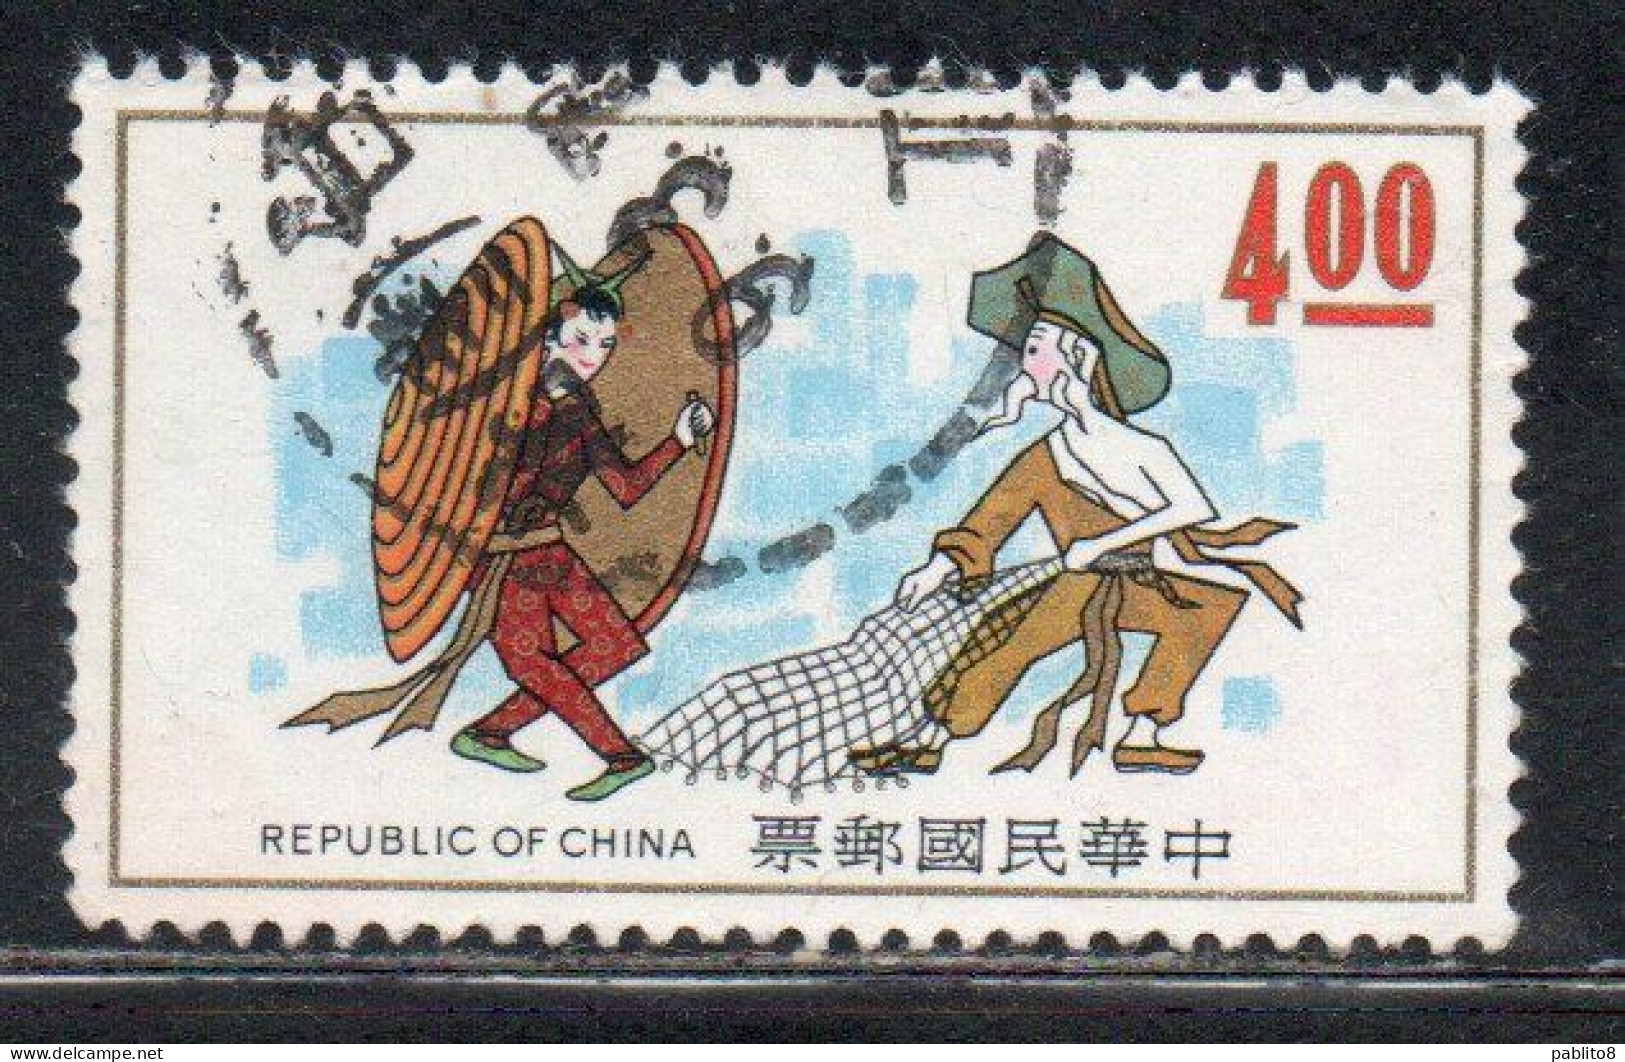 CHINA REPUBLIC CINA TAIWAN FORMOSA 1973 CHINESE FOLKLORE OYSTER FAIRY AND FISHERMAN'S DANCE 4$ USED USATO OBLITERE' - Oblitérés